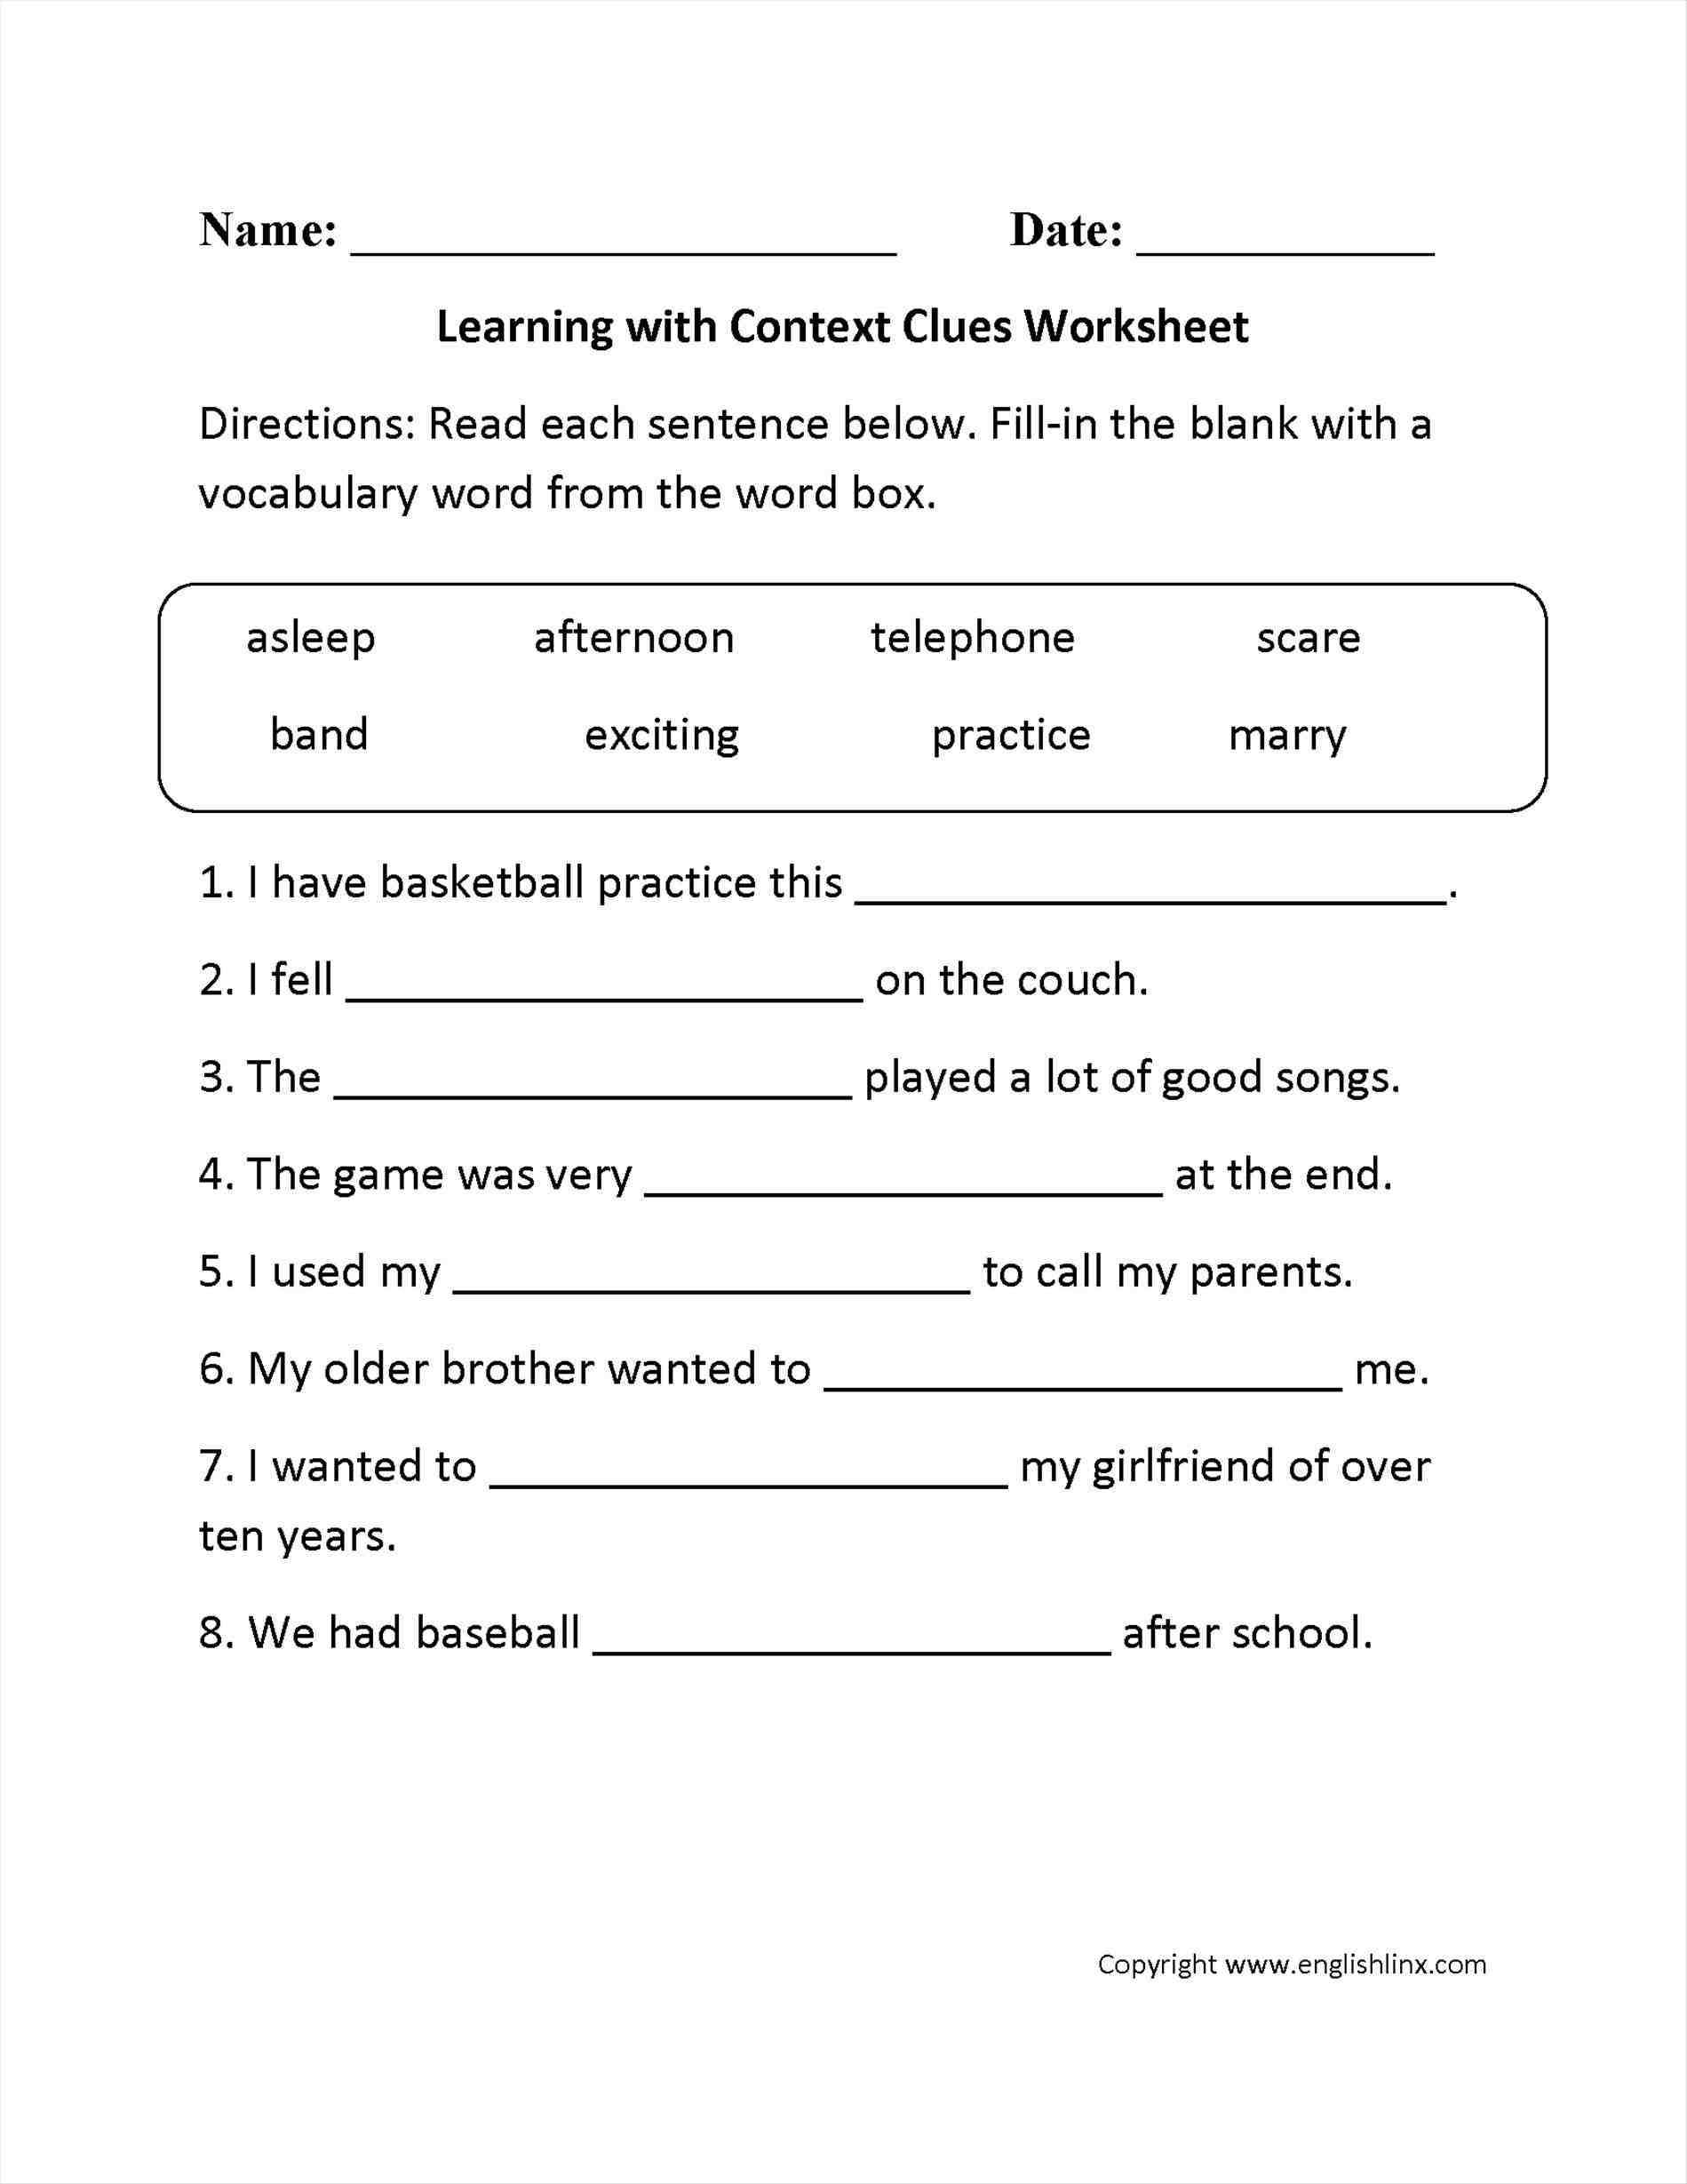 Drawing Conclusions Worksheets 3rd Grade with Drawing Worksheets for 3rd Grade